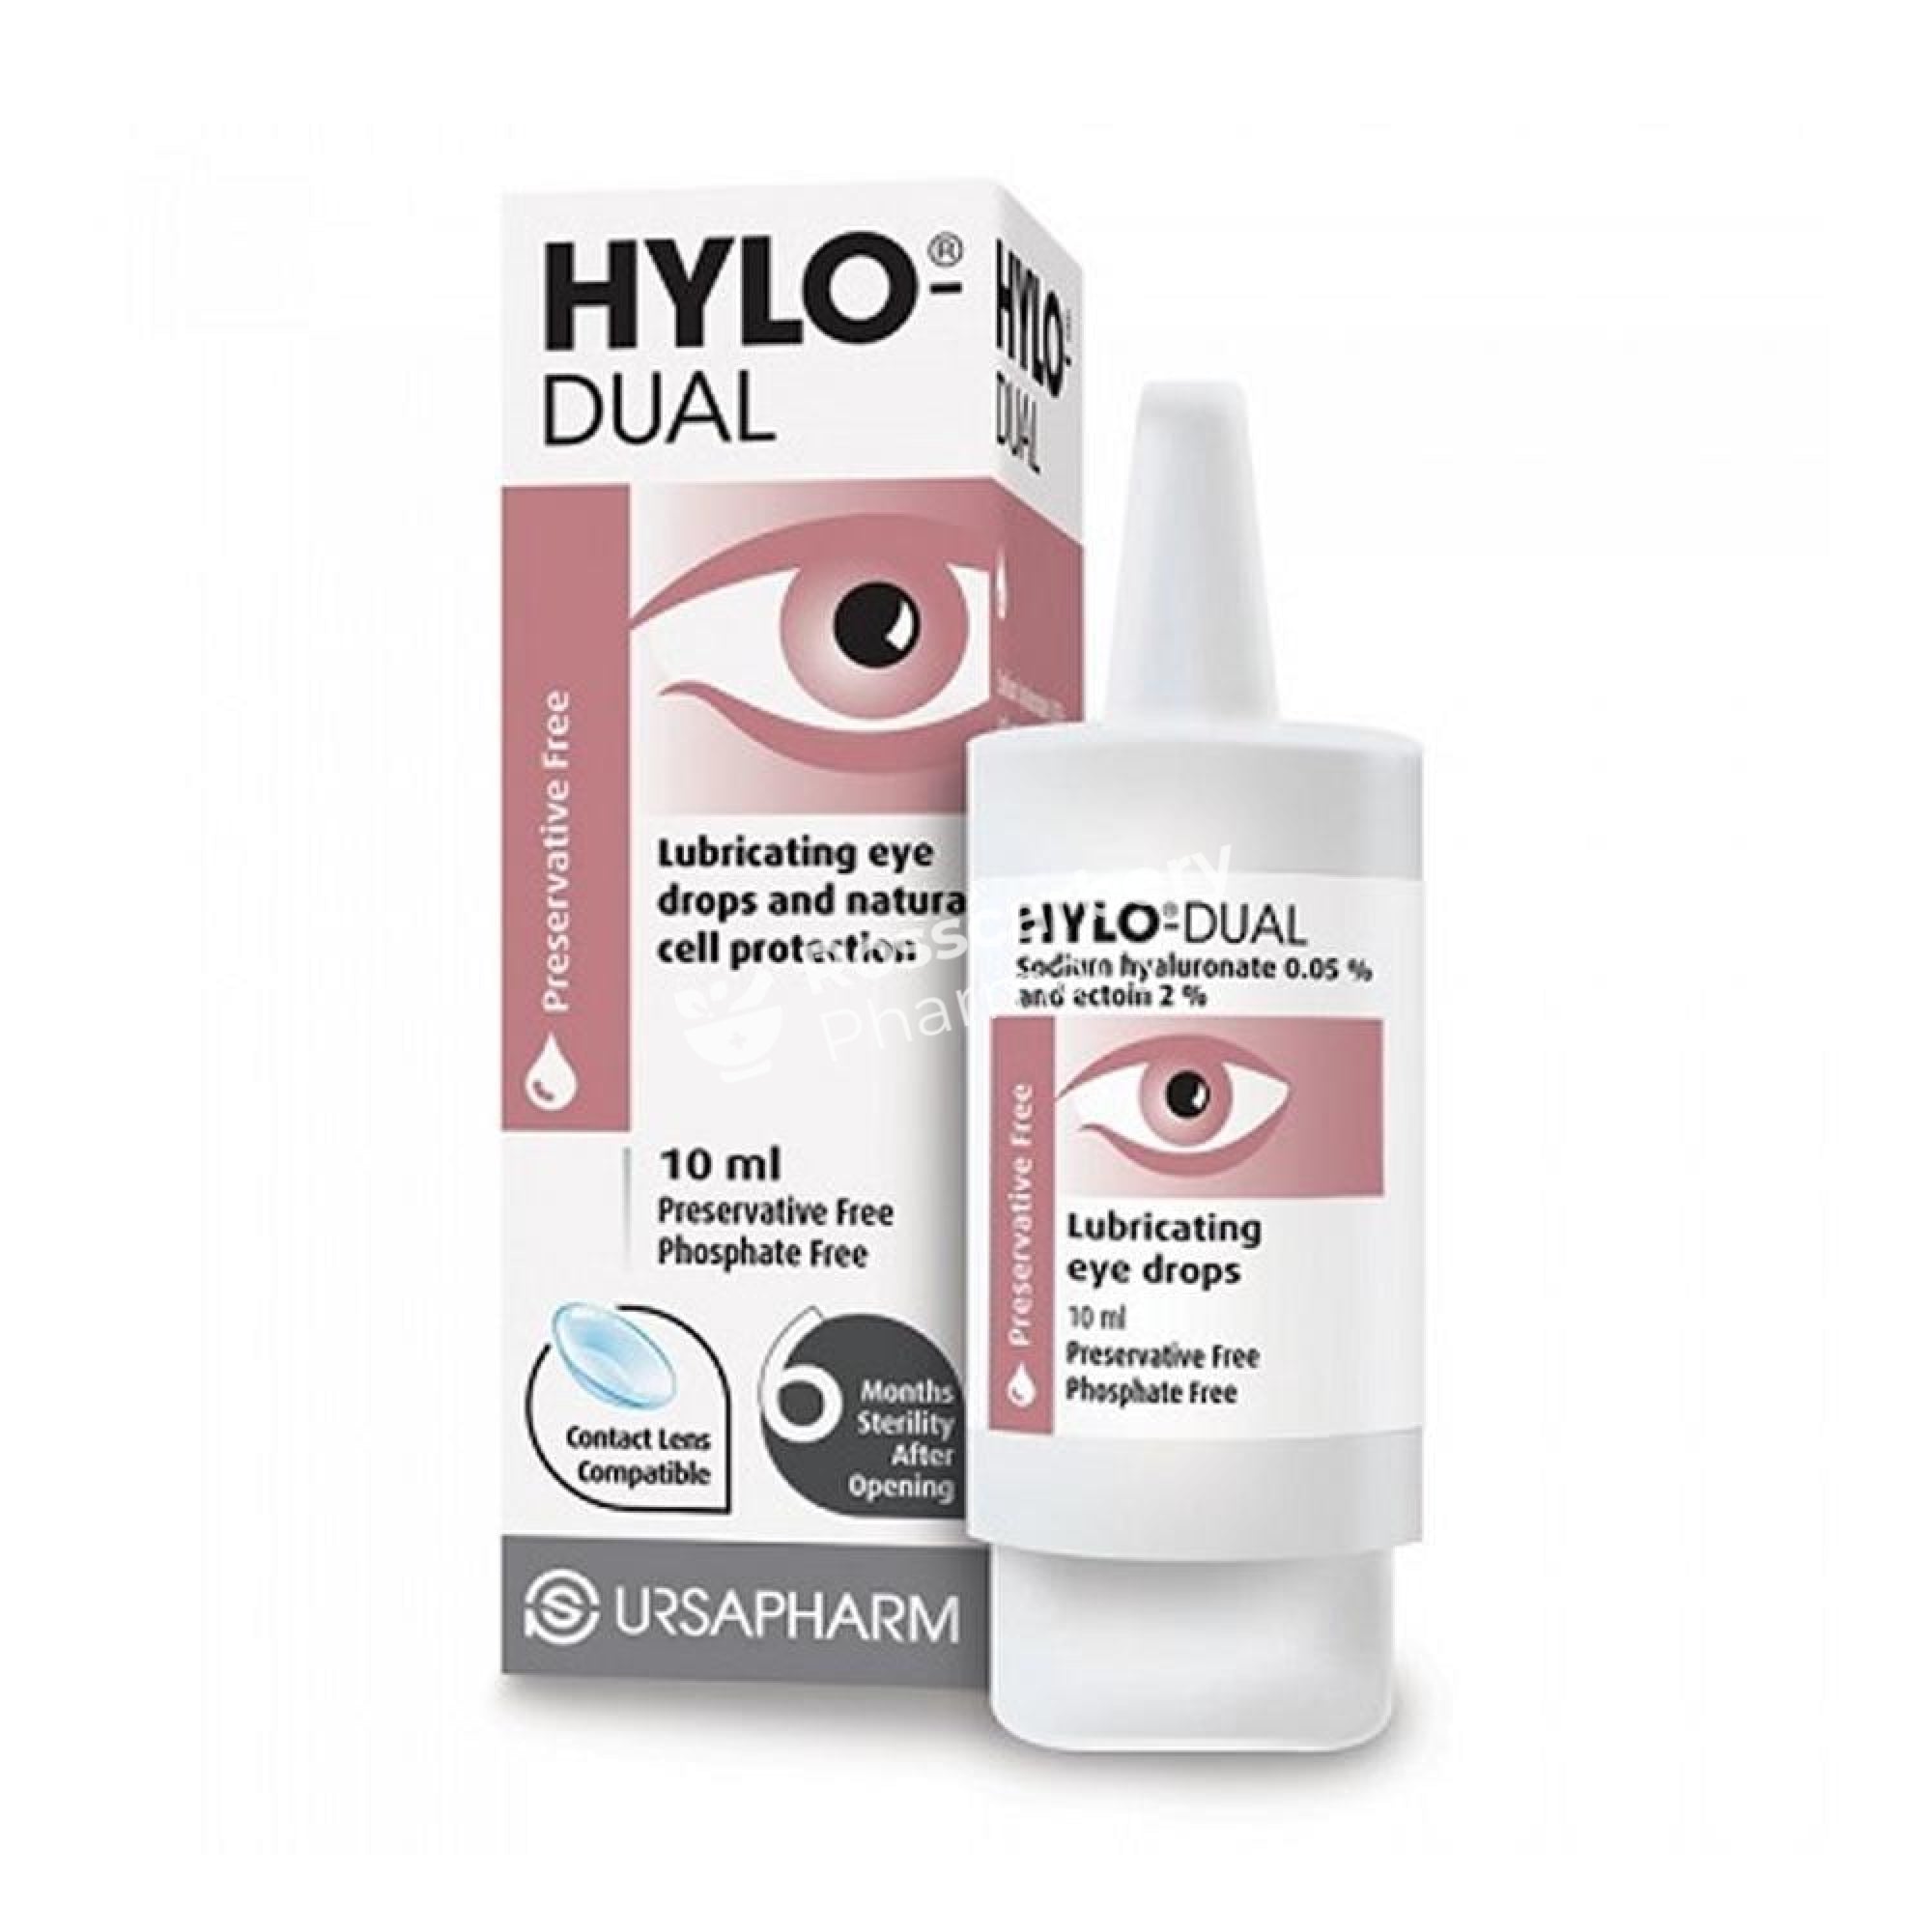 Hylo-Dual Eye Drops - Lubricating & Natural Cell Protection